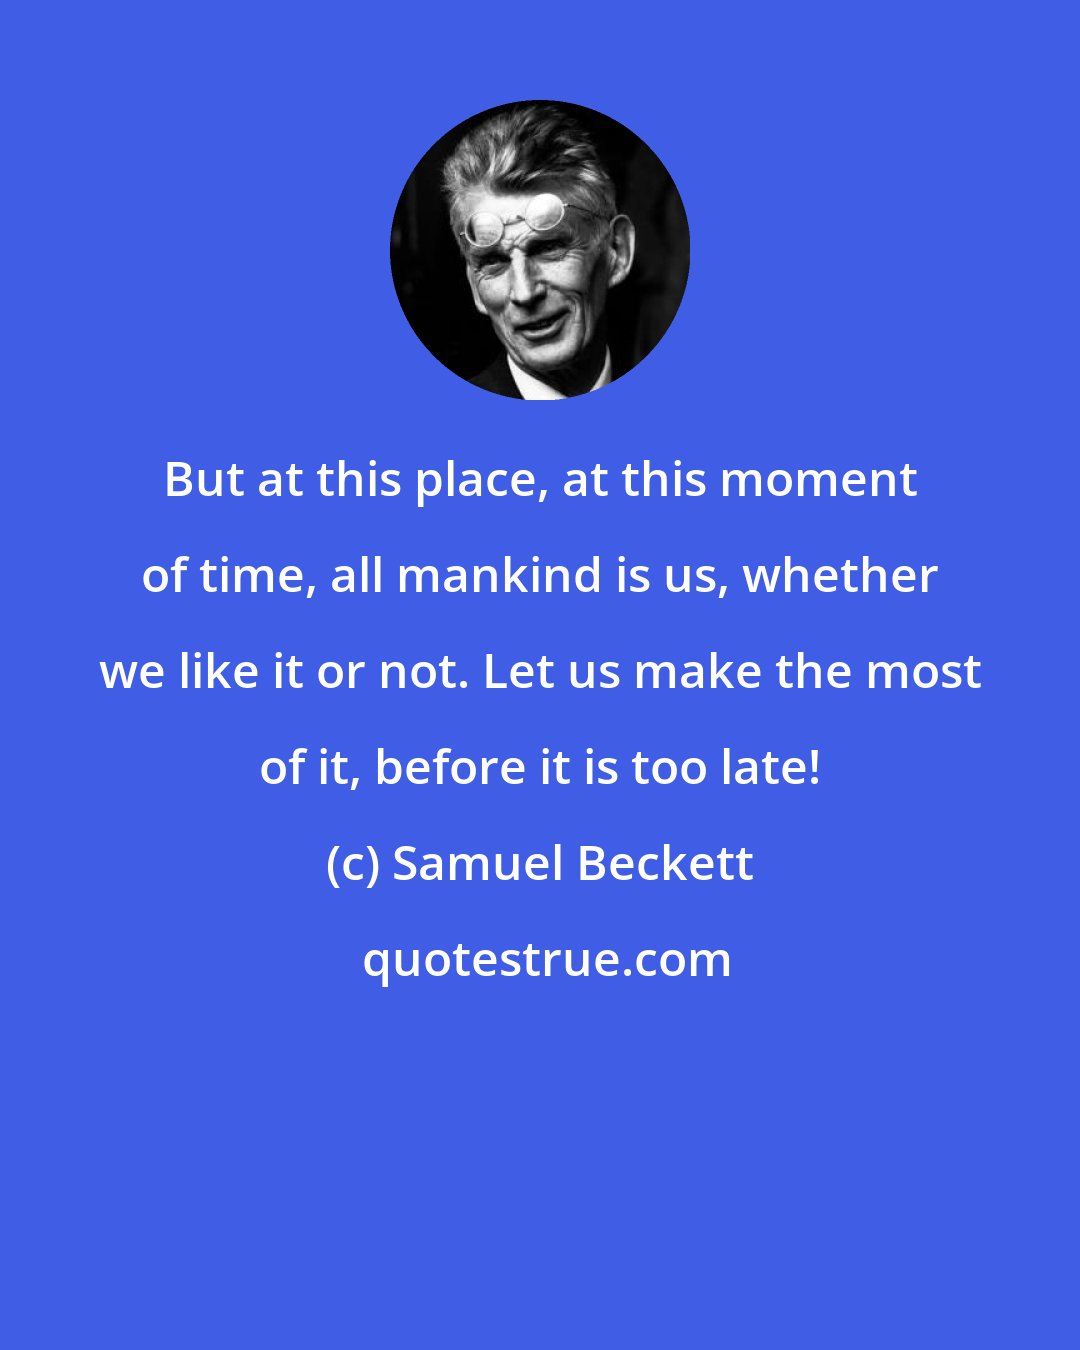 Samuel Beckett: But at this place, at this moment of time, all mankind is us, whether we like it or not. Let us make the most of it, before it is too late!